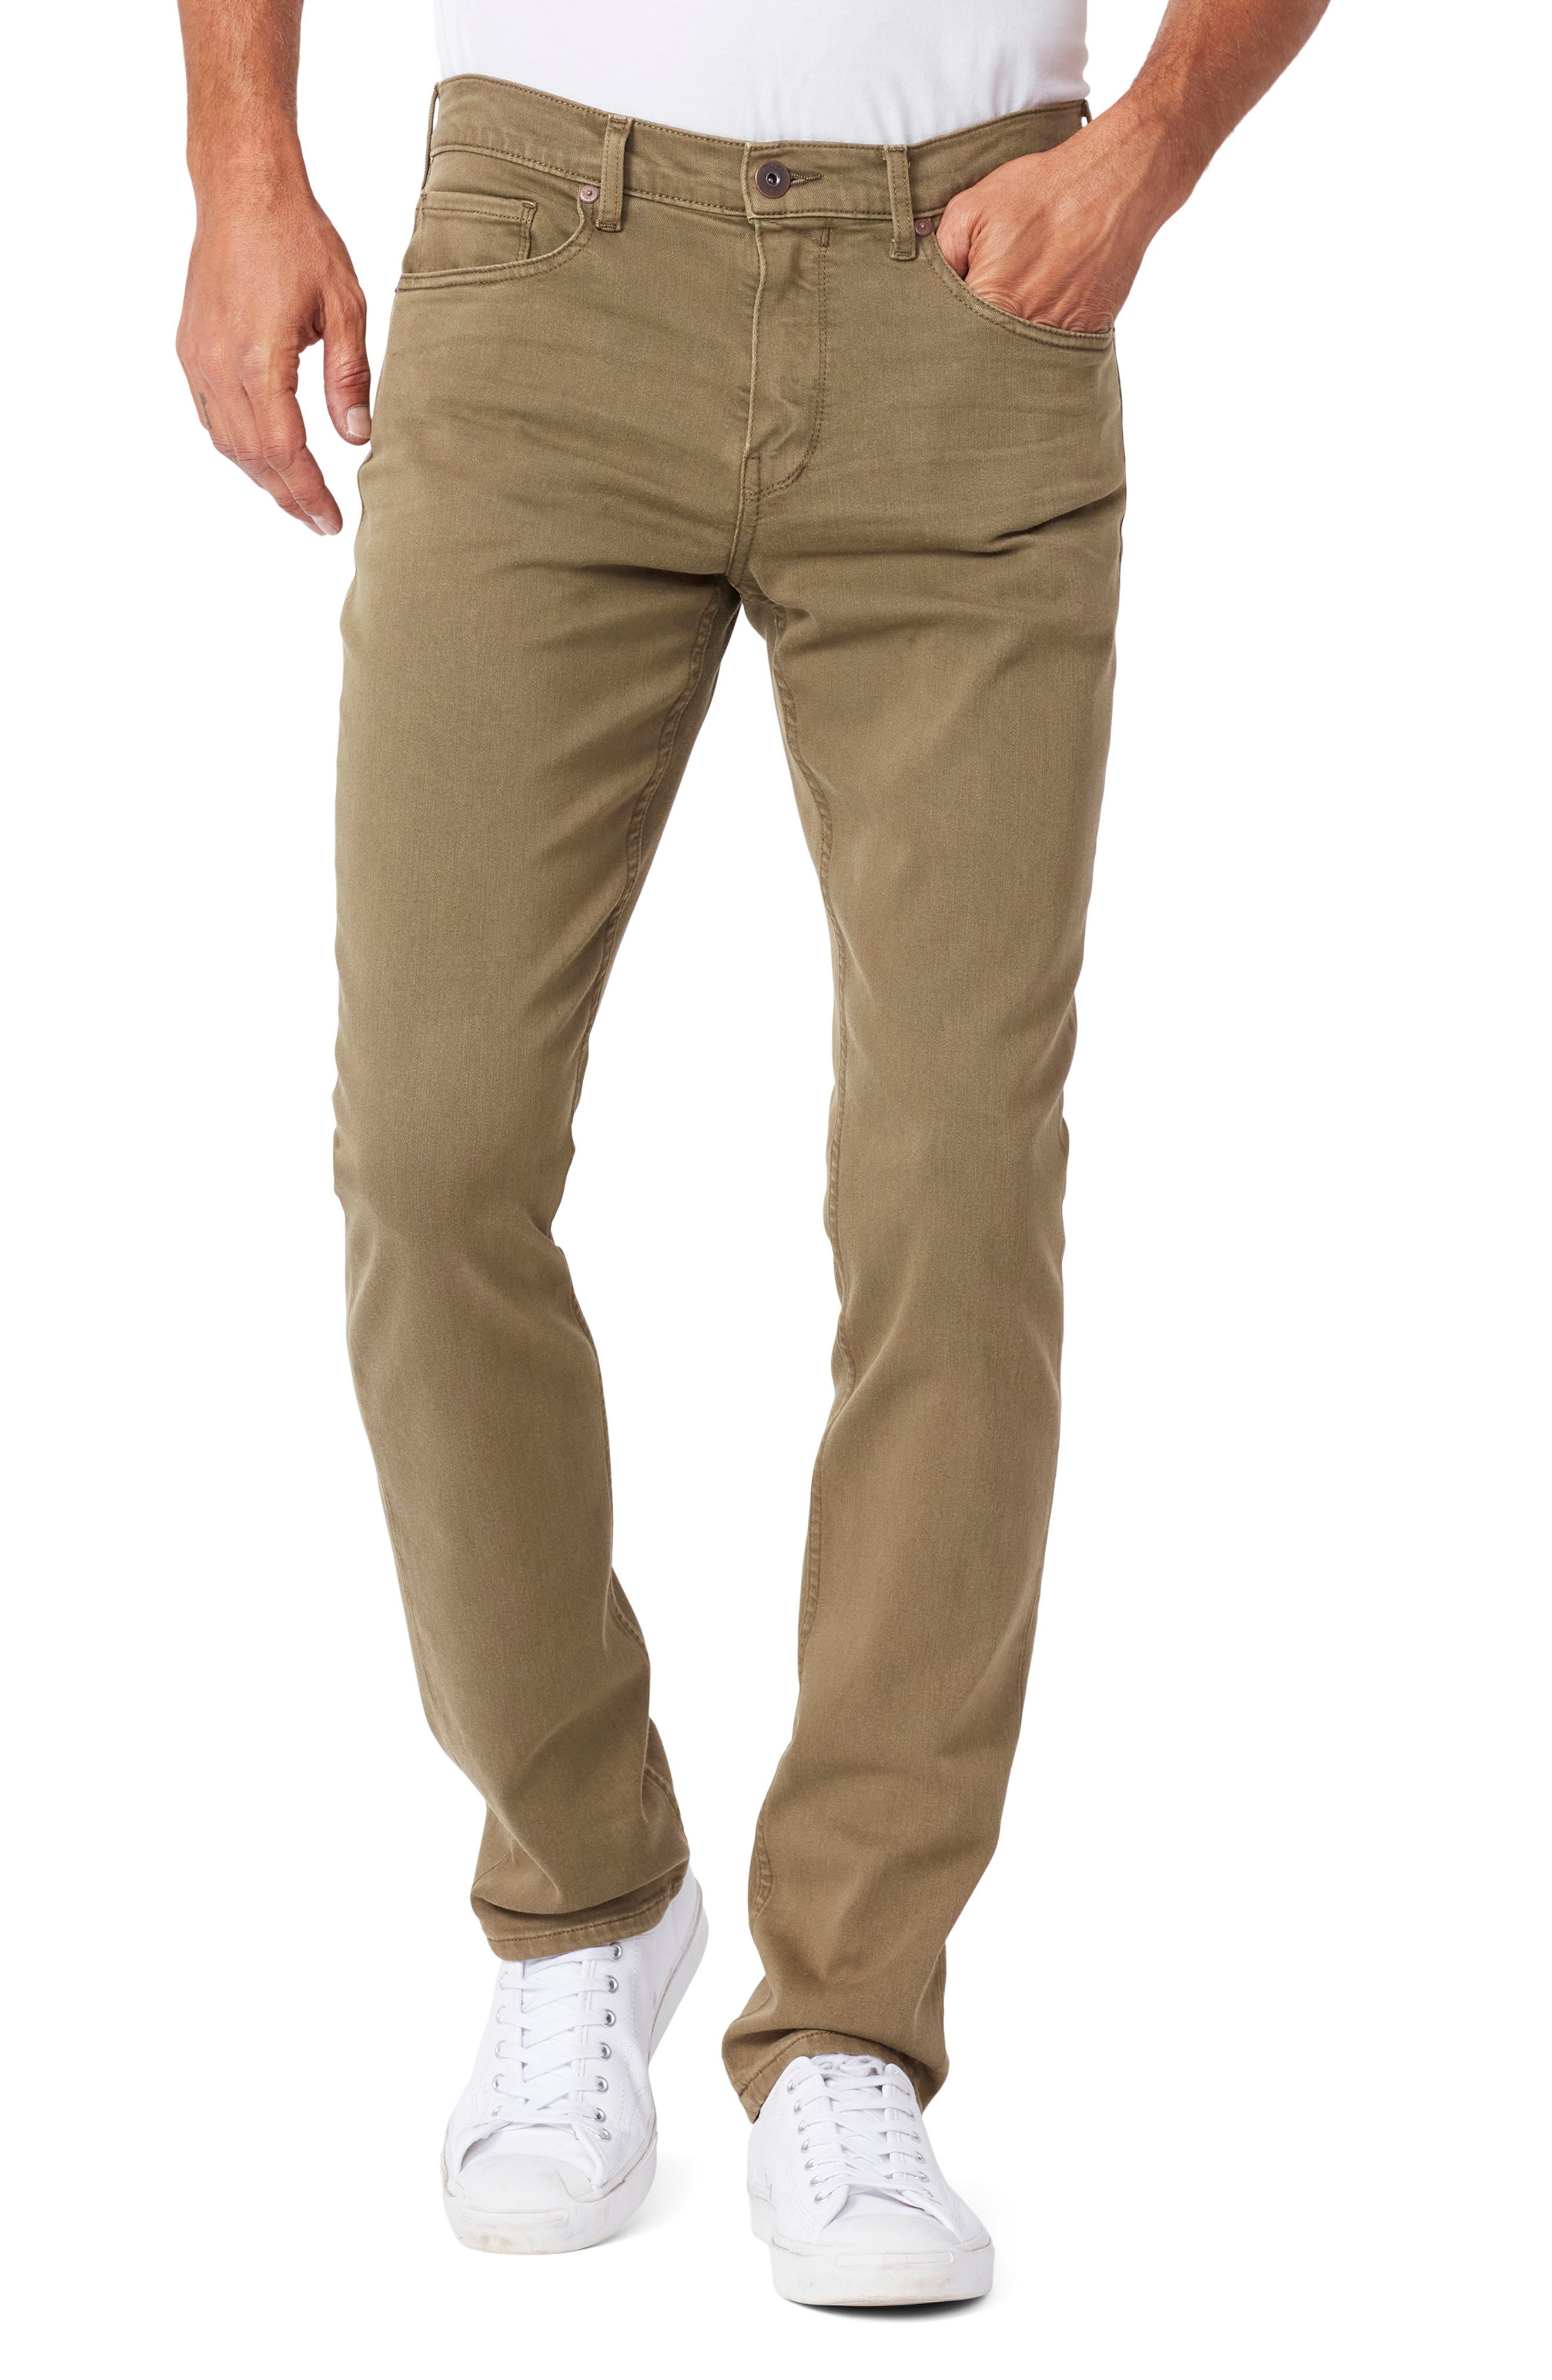 Lucky brand mens 121 slim straight fit pants stretch brown MSRP $99.00 New